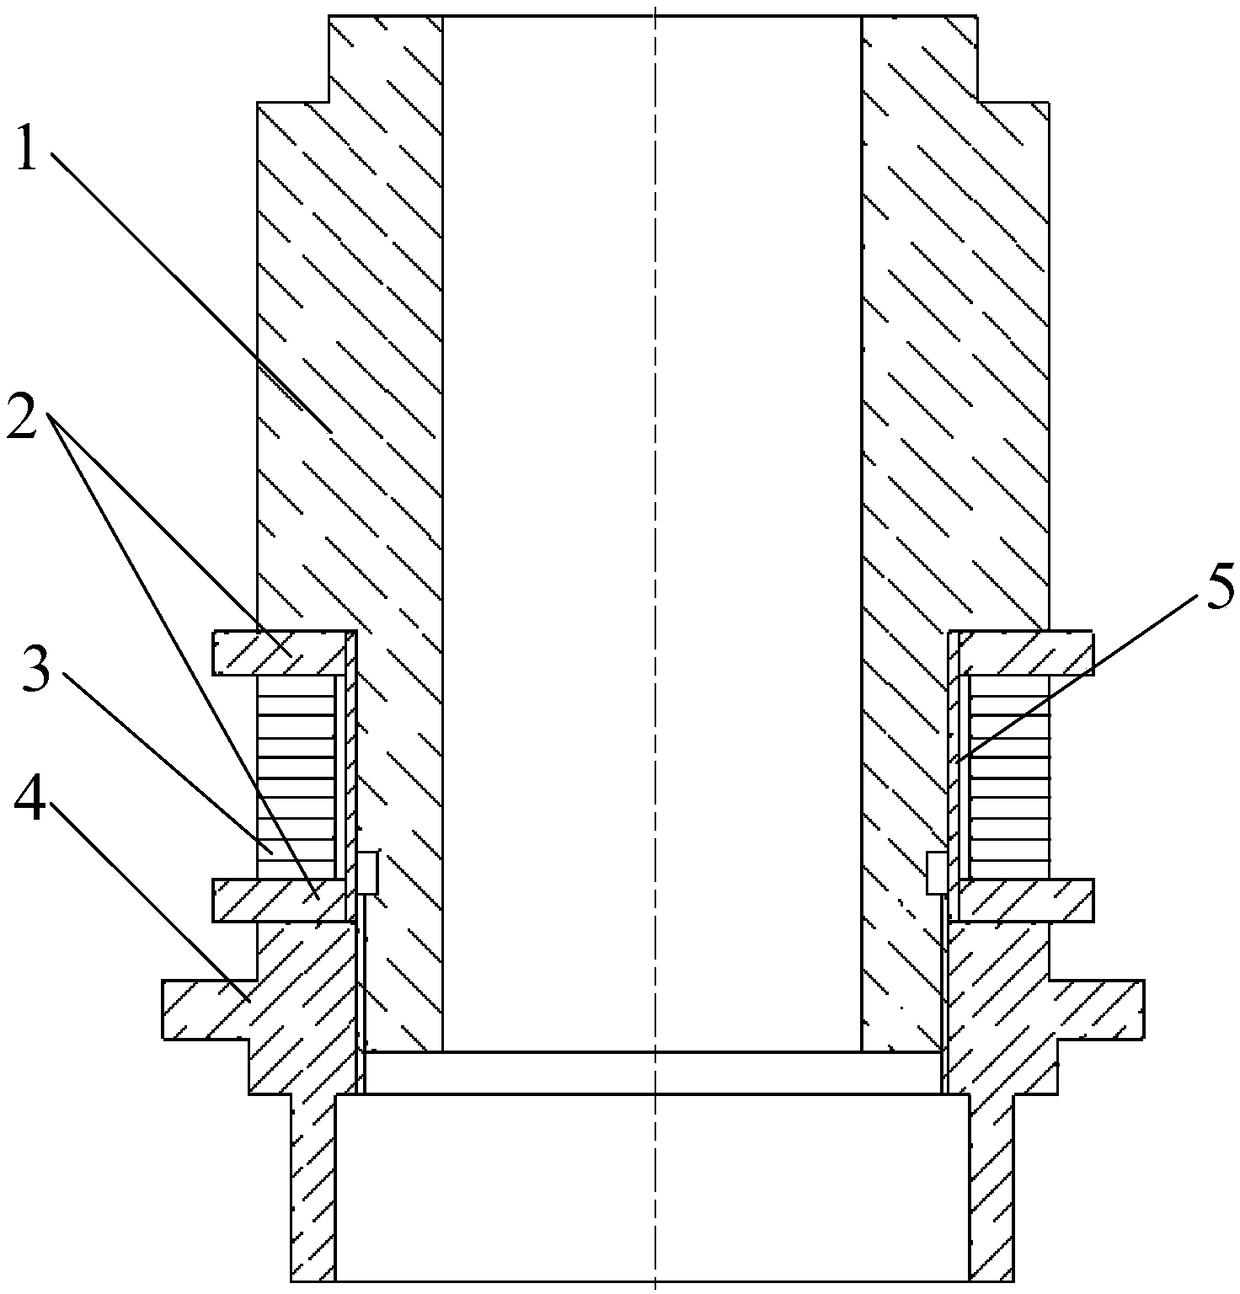 Mechanical shafting rotary error active compensation device based on piezoelectric actuator